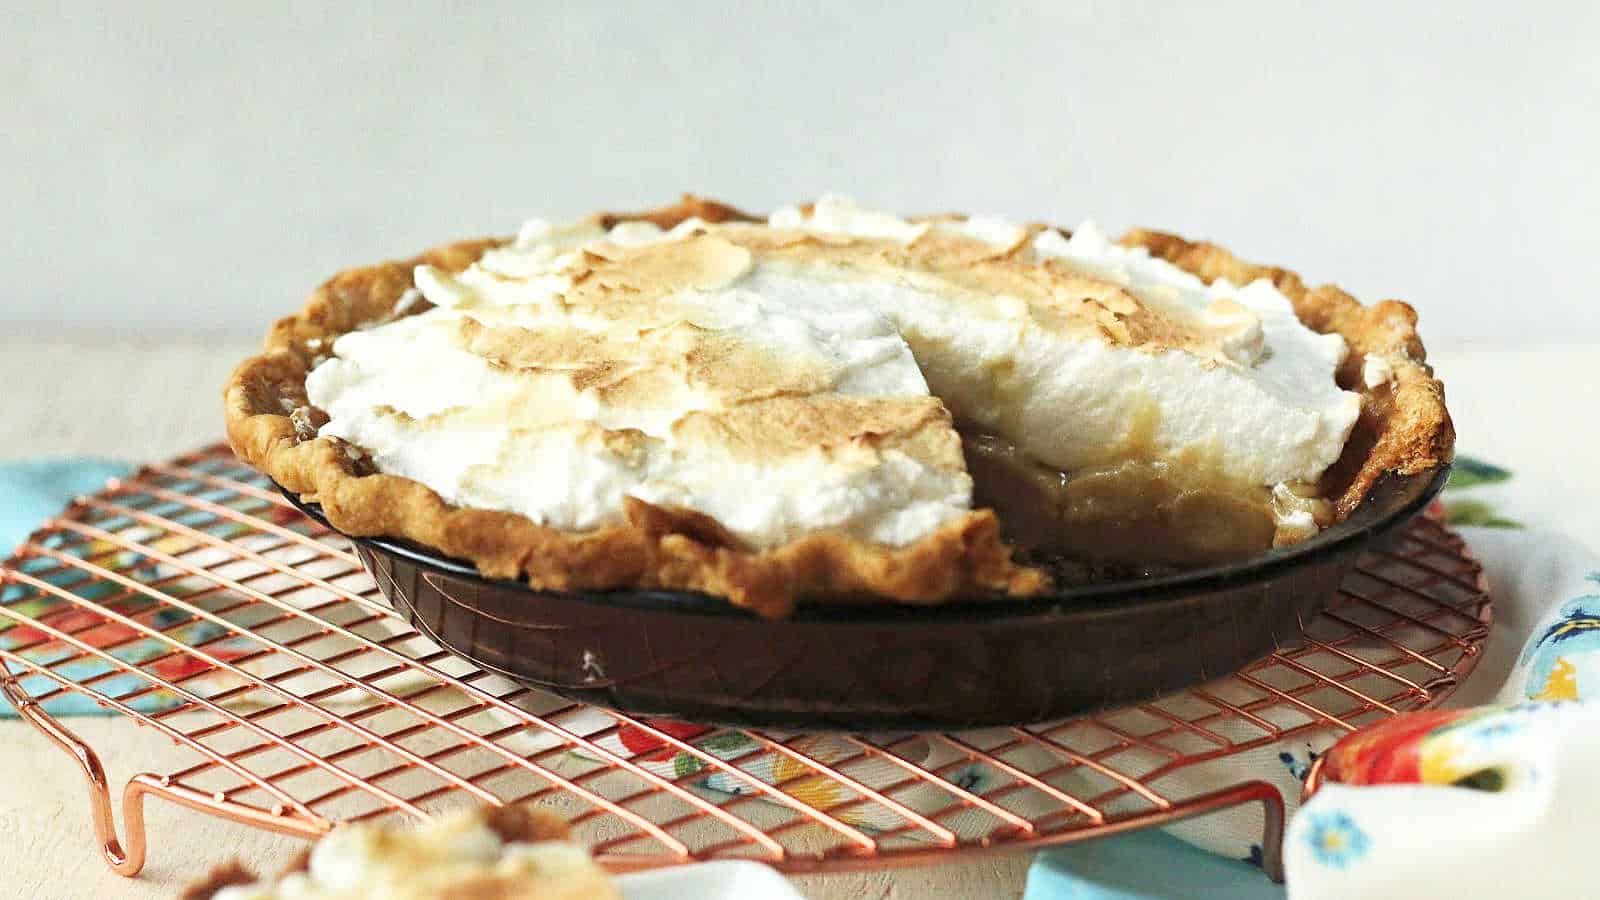 <p>This fall classic Butterscotch Meringue Pie is an old-fashioned favorite, perfect for those who want something rich, creamy, and indulgent.<br><strong>Get the Recipe: </strong><a href="https://onehotoven.com/butterscotch-meringue-pie/?utm_source=msn&utm_medium=page&utm_campaign=msn">Butterscotch Pie</a></p>